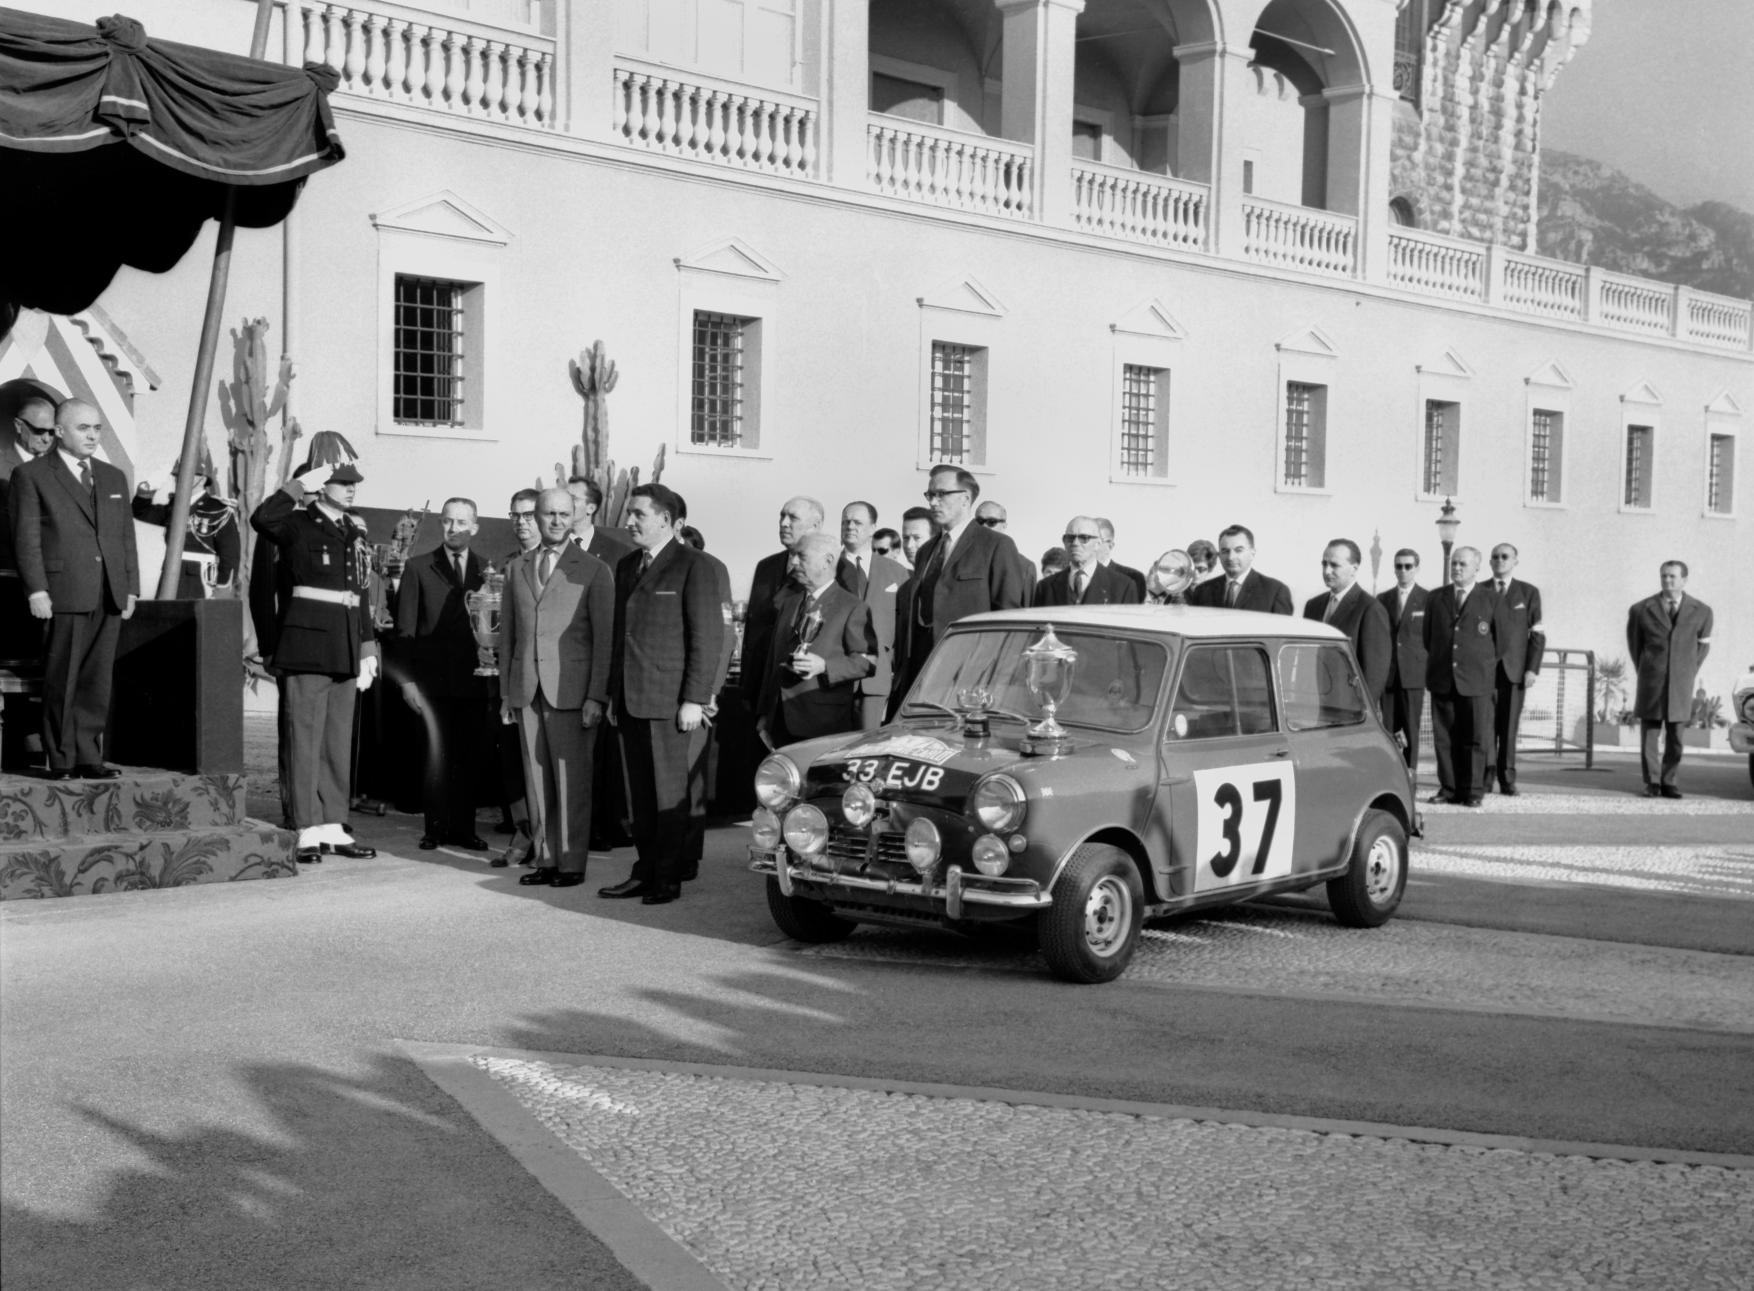 Paddy Hopkirk/Henry Liddon in the Mini Cooper at the Rallye Monte Carlo 1964